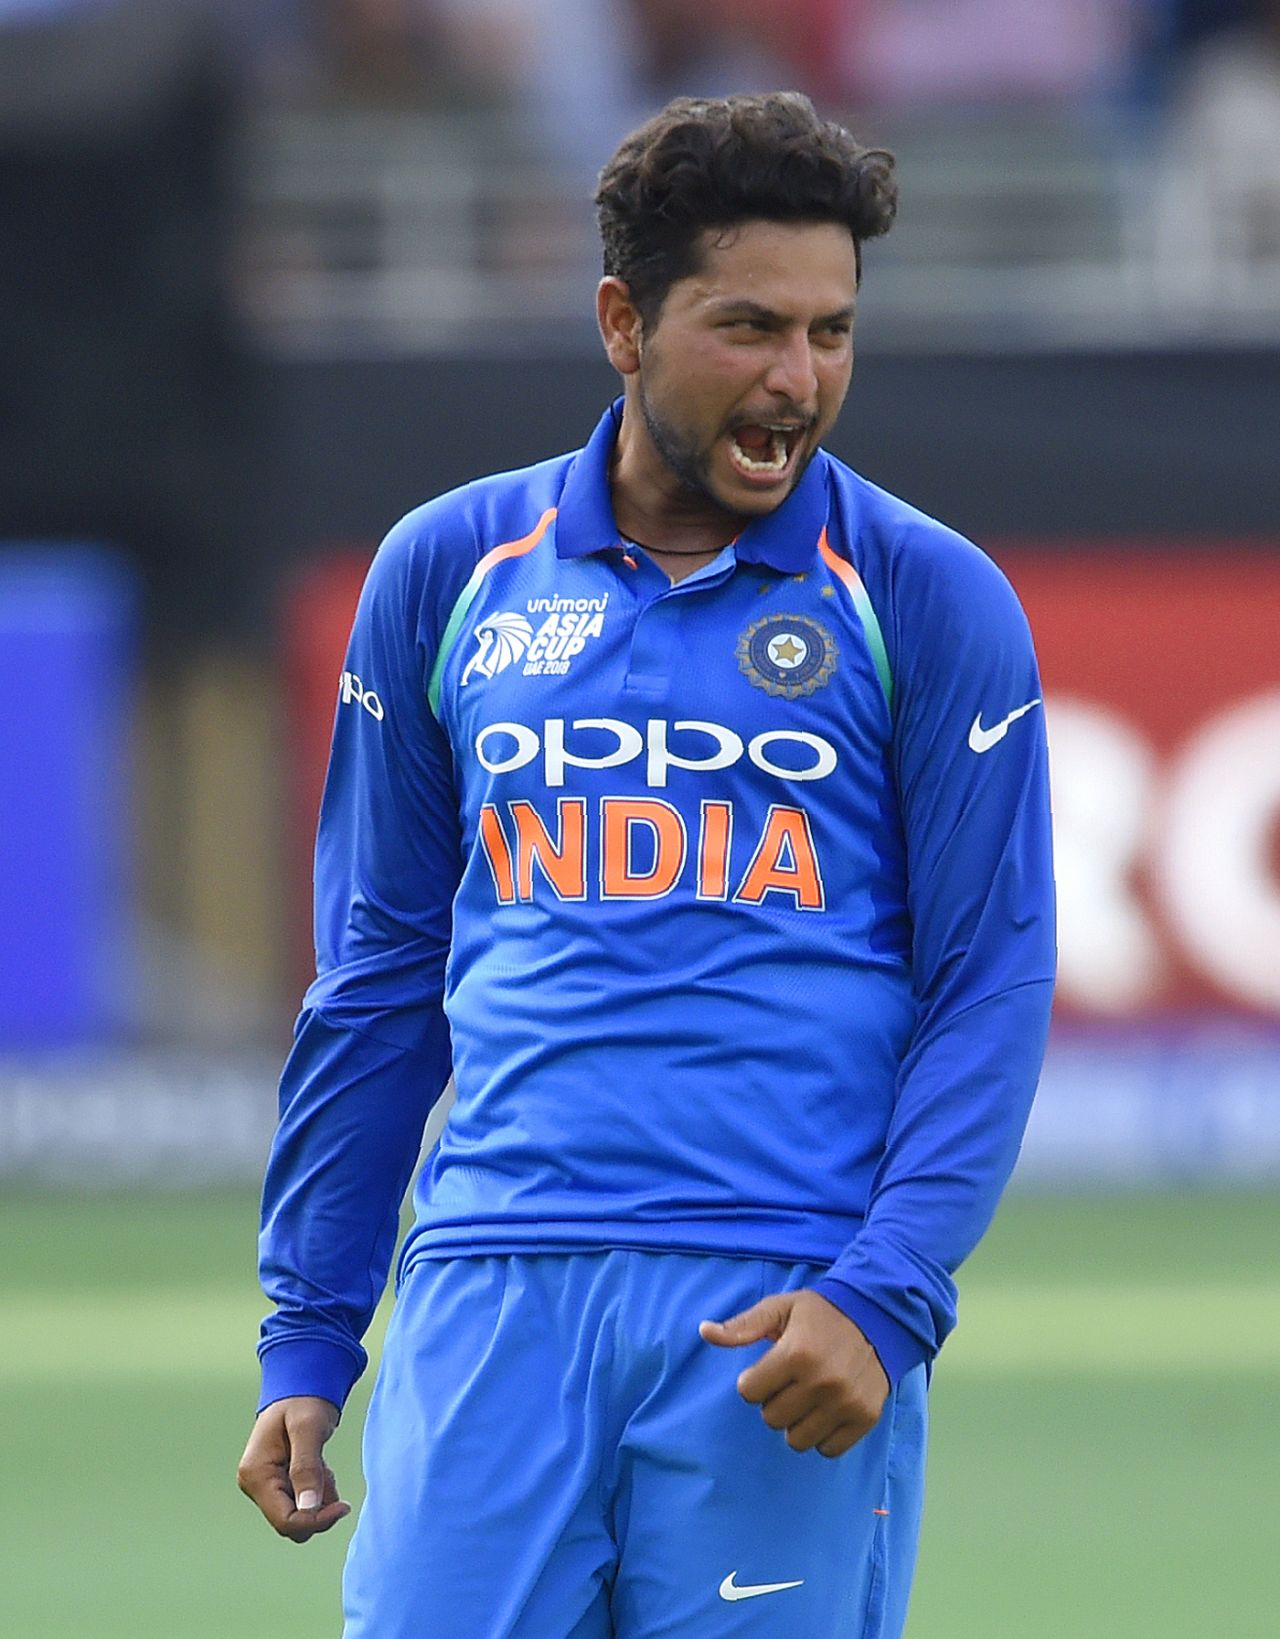 Kuldeep Yadav is stoked upon picking a wicket, India v Pakistan, Super Four, Asia Cup 2018, Dubai, September 23, 2018